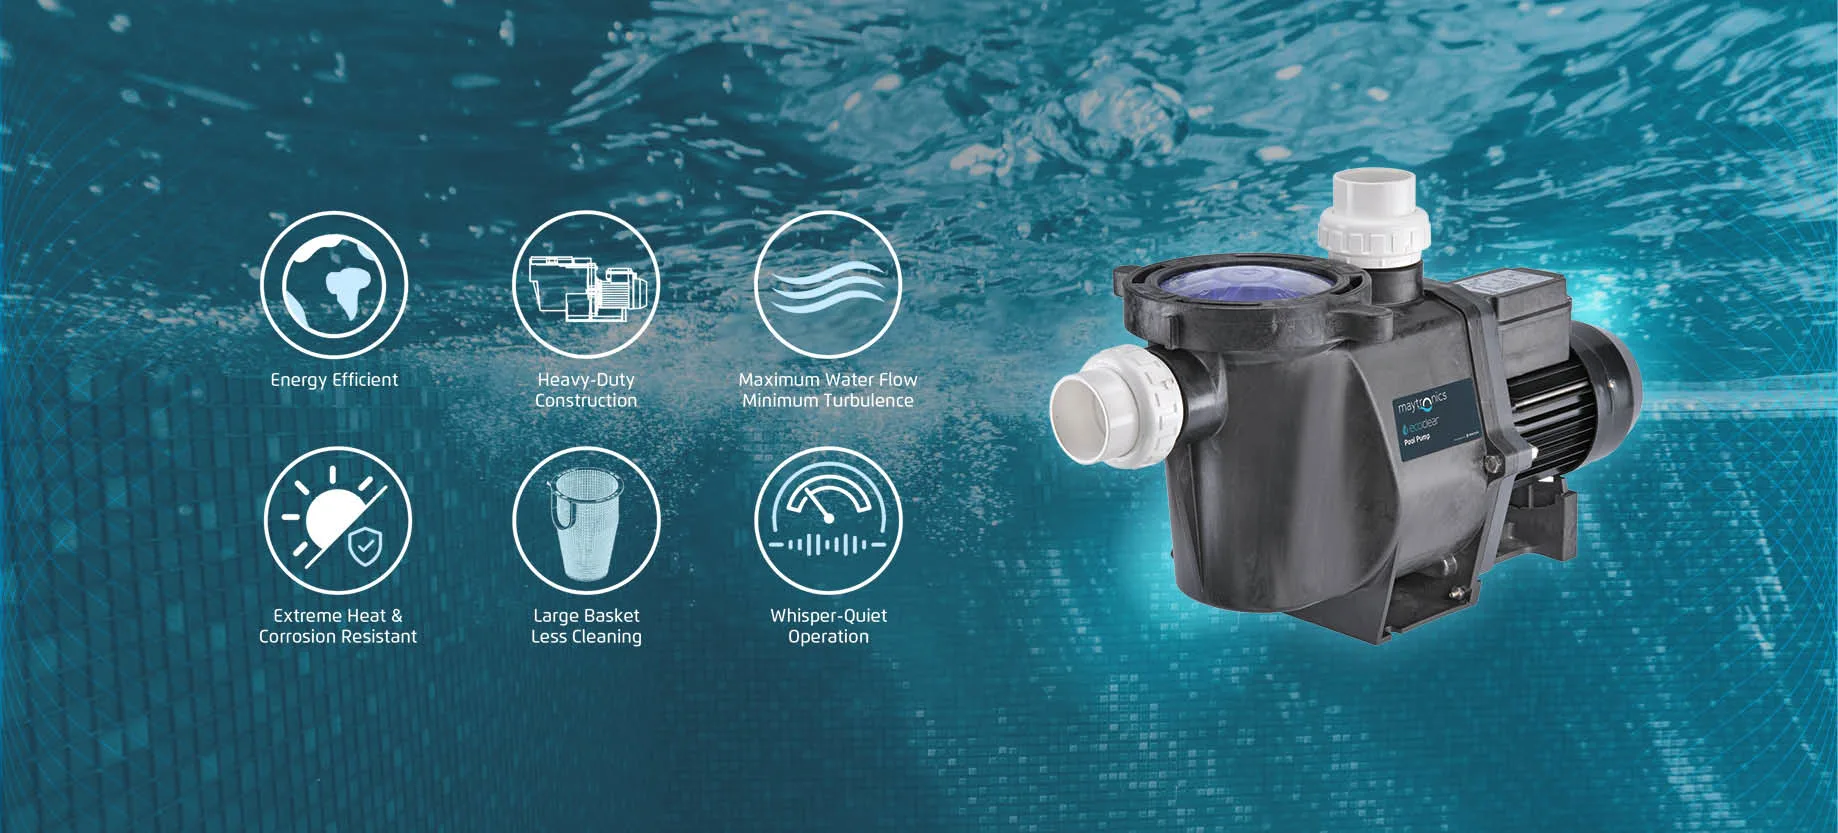 ecoclear Pool Pump features